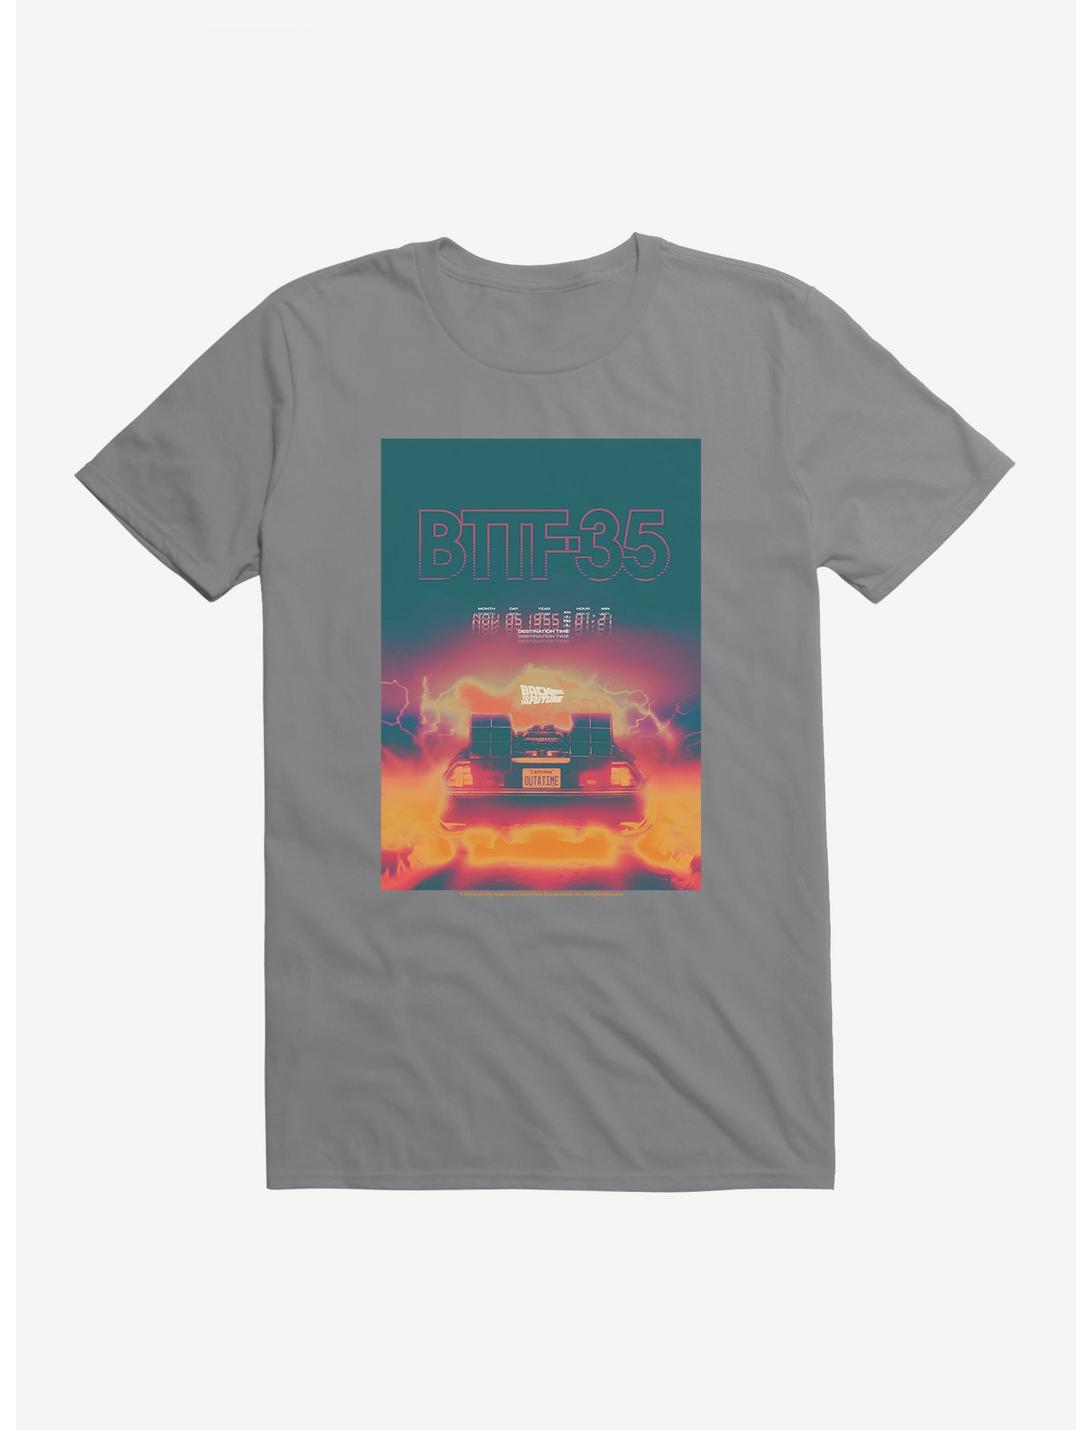 Back To The Future DeLorean Fired Up T-Shirt, , hi-res